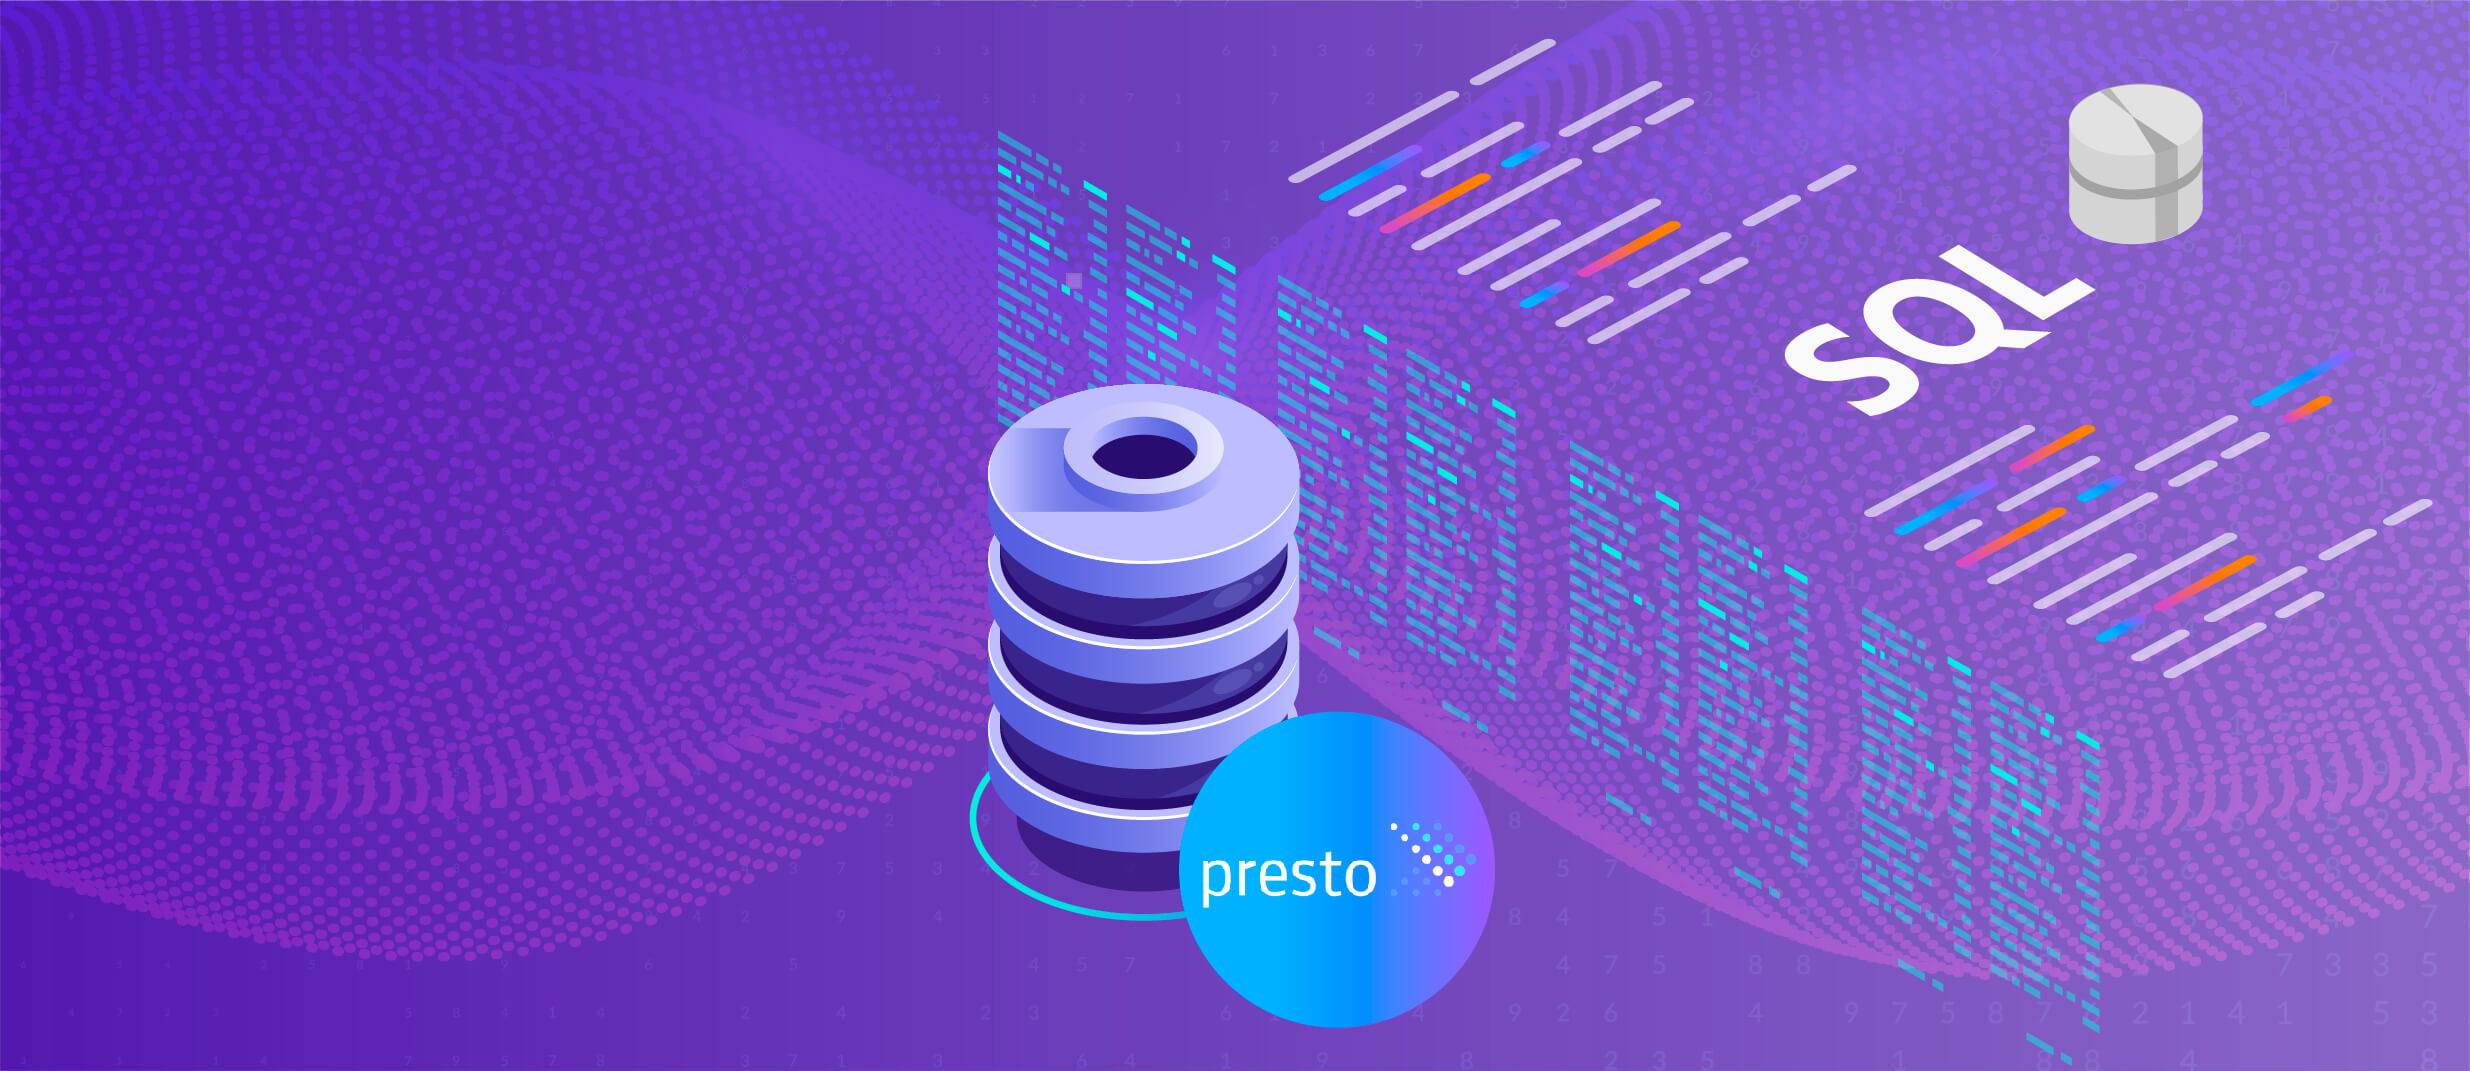 Hands-on Presto: Fast SQL on Anything